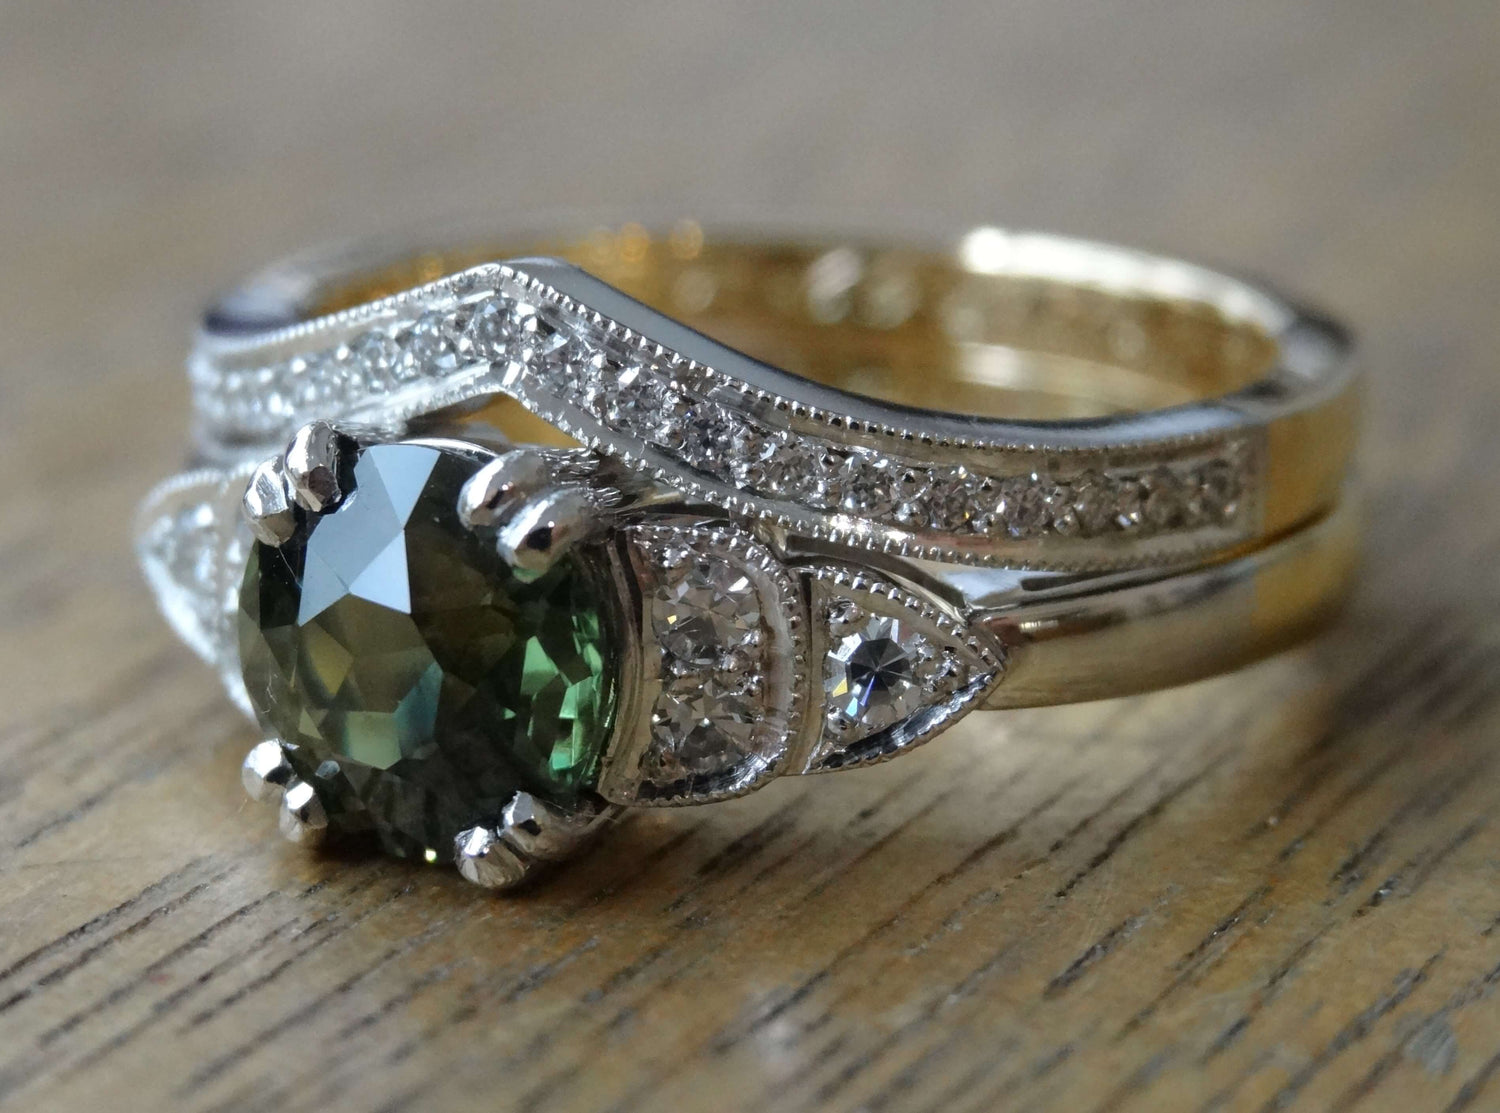 An antique, green sapphire set in an art deco inspired engagement ring with a fitted wedding ring